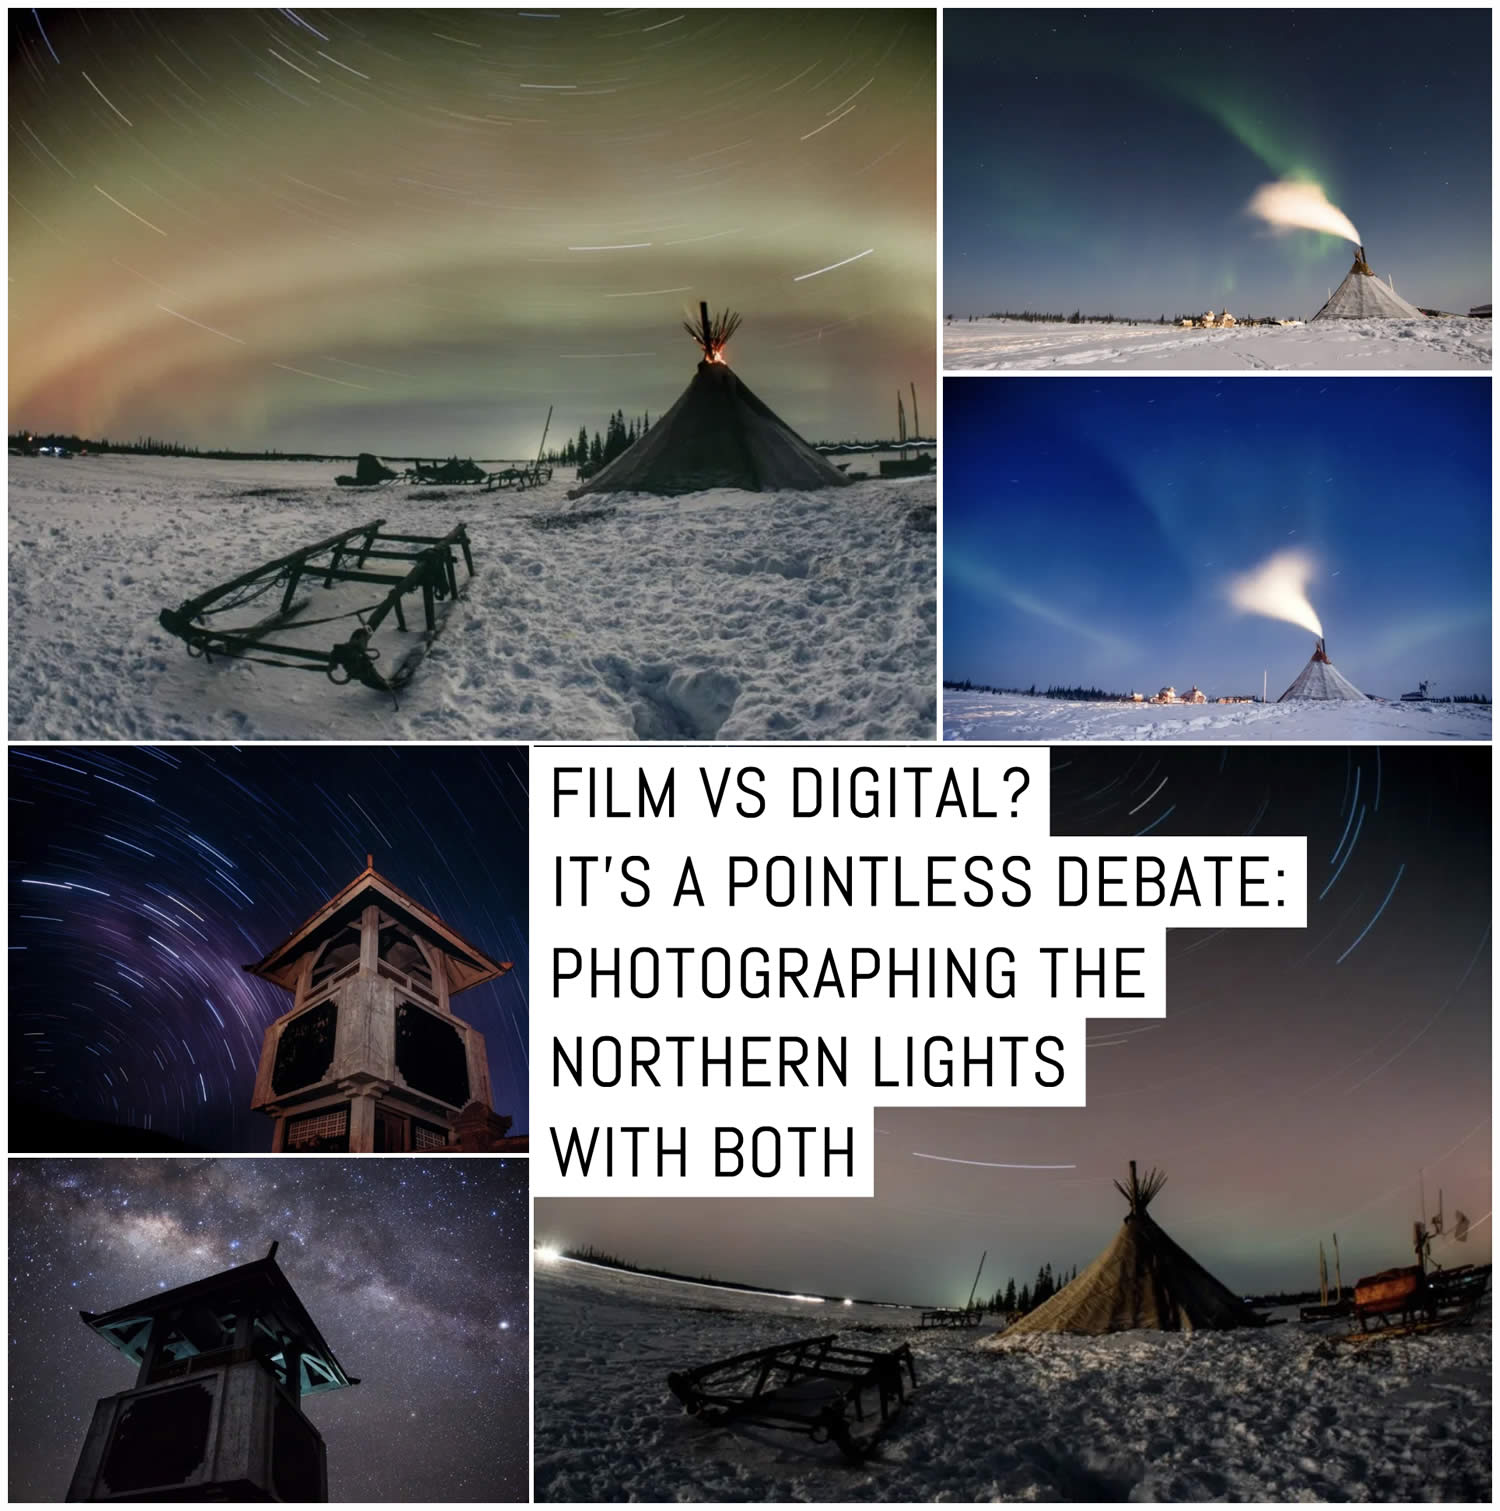 Film vs digital? It’s a pointless debate: photographing the Northern Lights on both